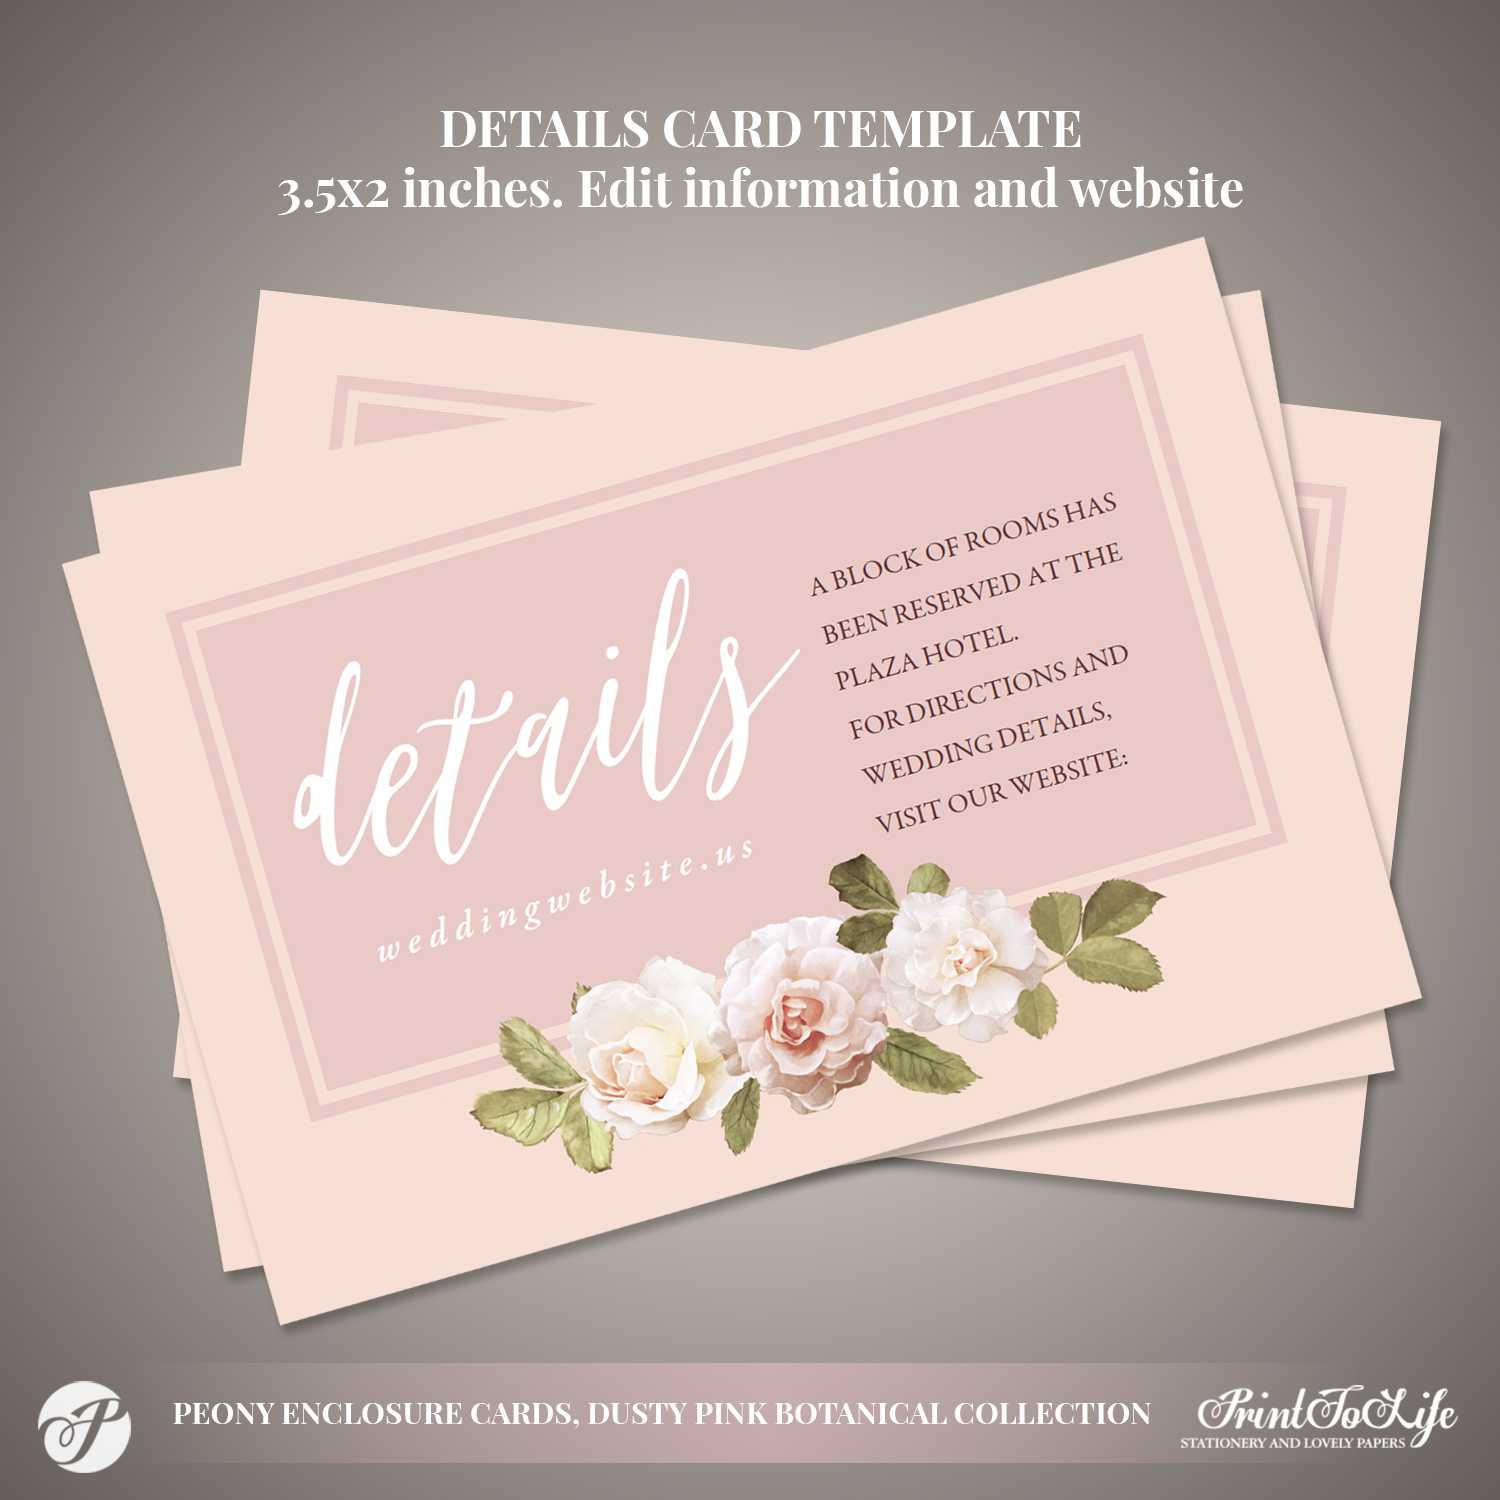 Peony Details Card, Wedding Information Card #dusty Pink Botanical  Collection Within Wedding Hotel Information Card Template